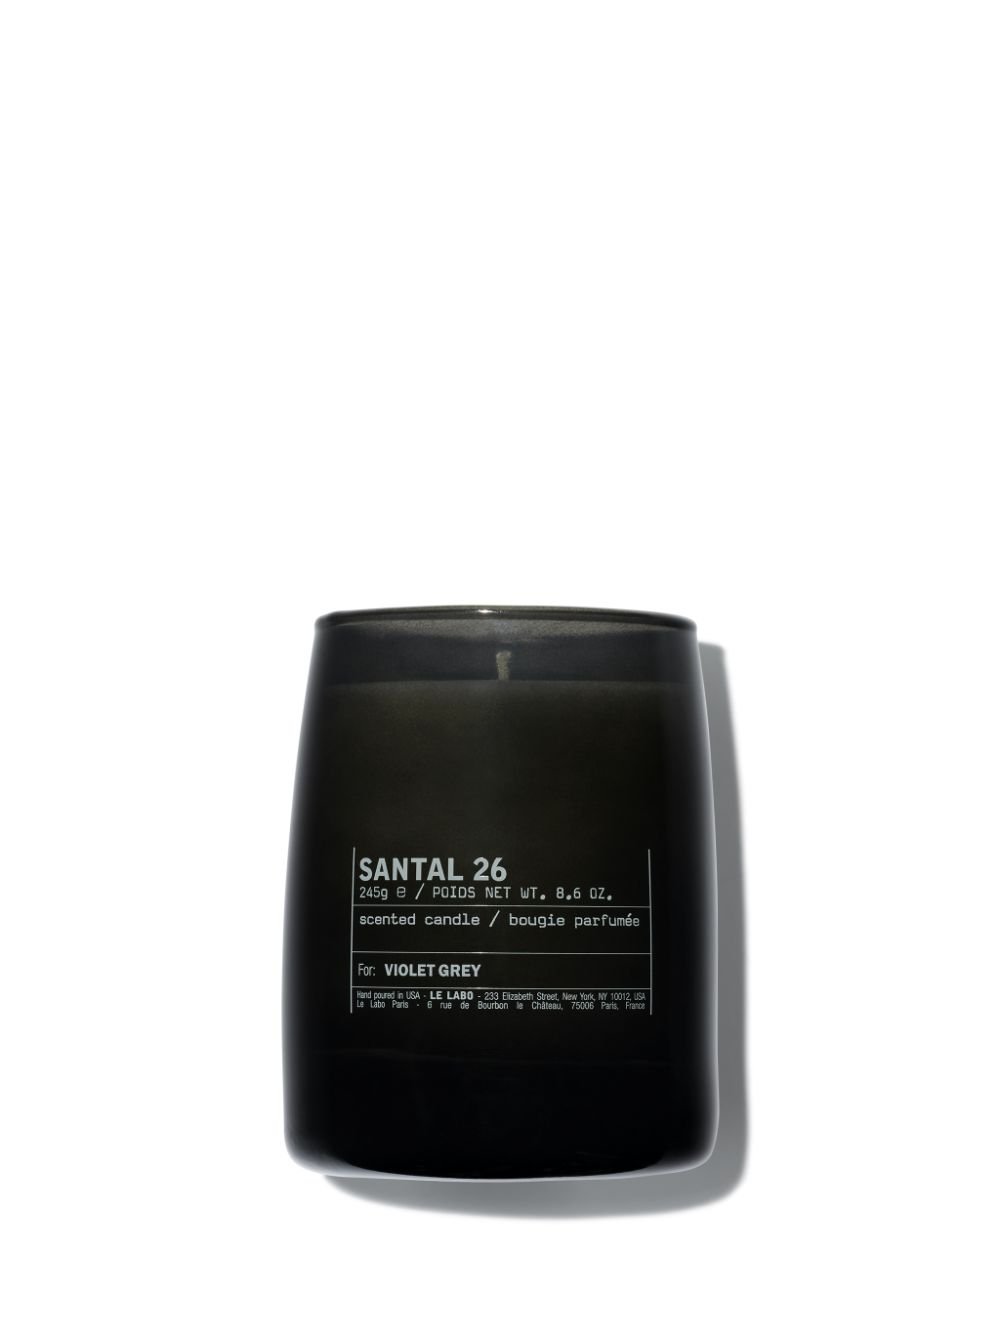 Image of <B>LE LABO</B><BR>SANTAL 26 CLASSIC CANDLE FOR VIOLET GREY